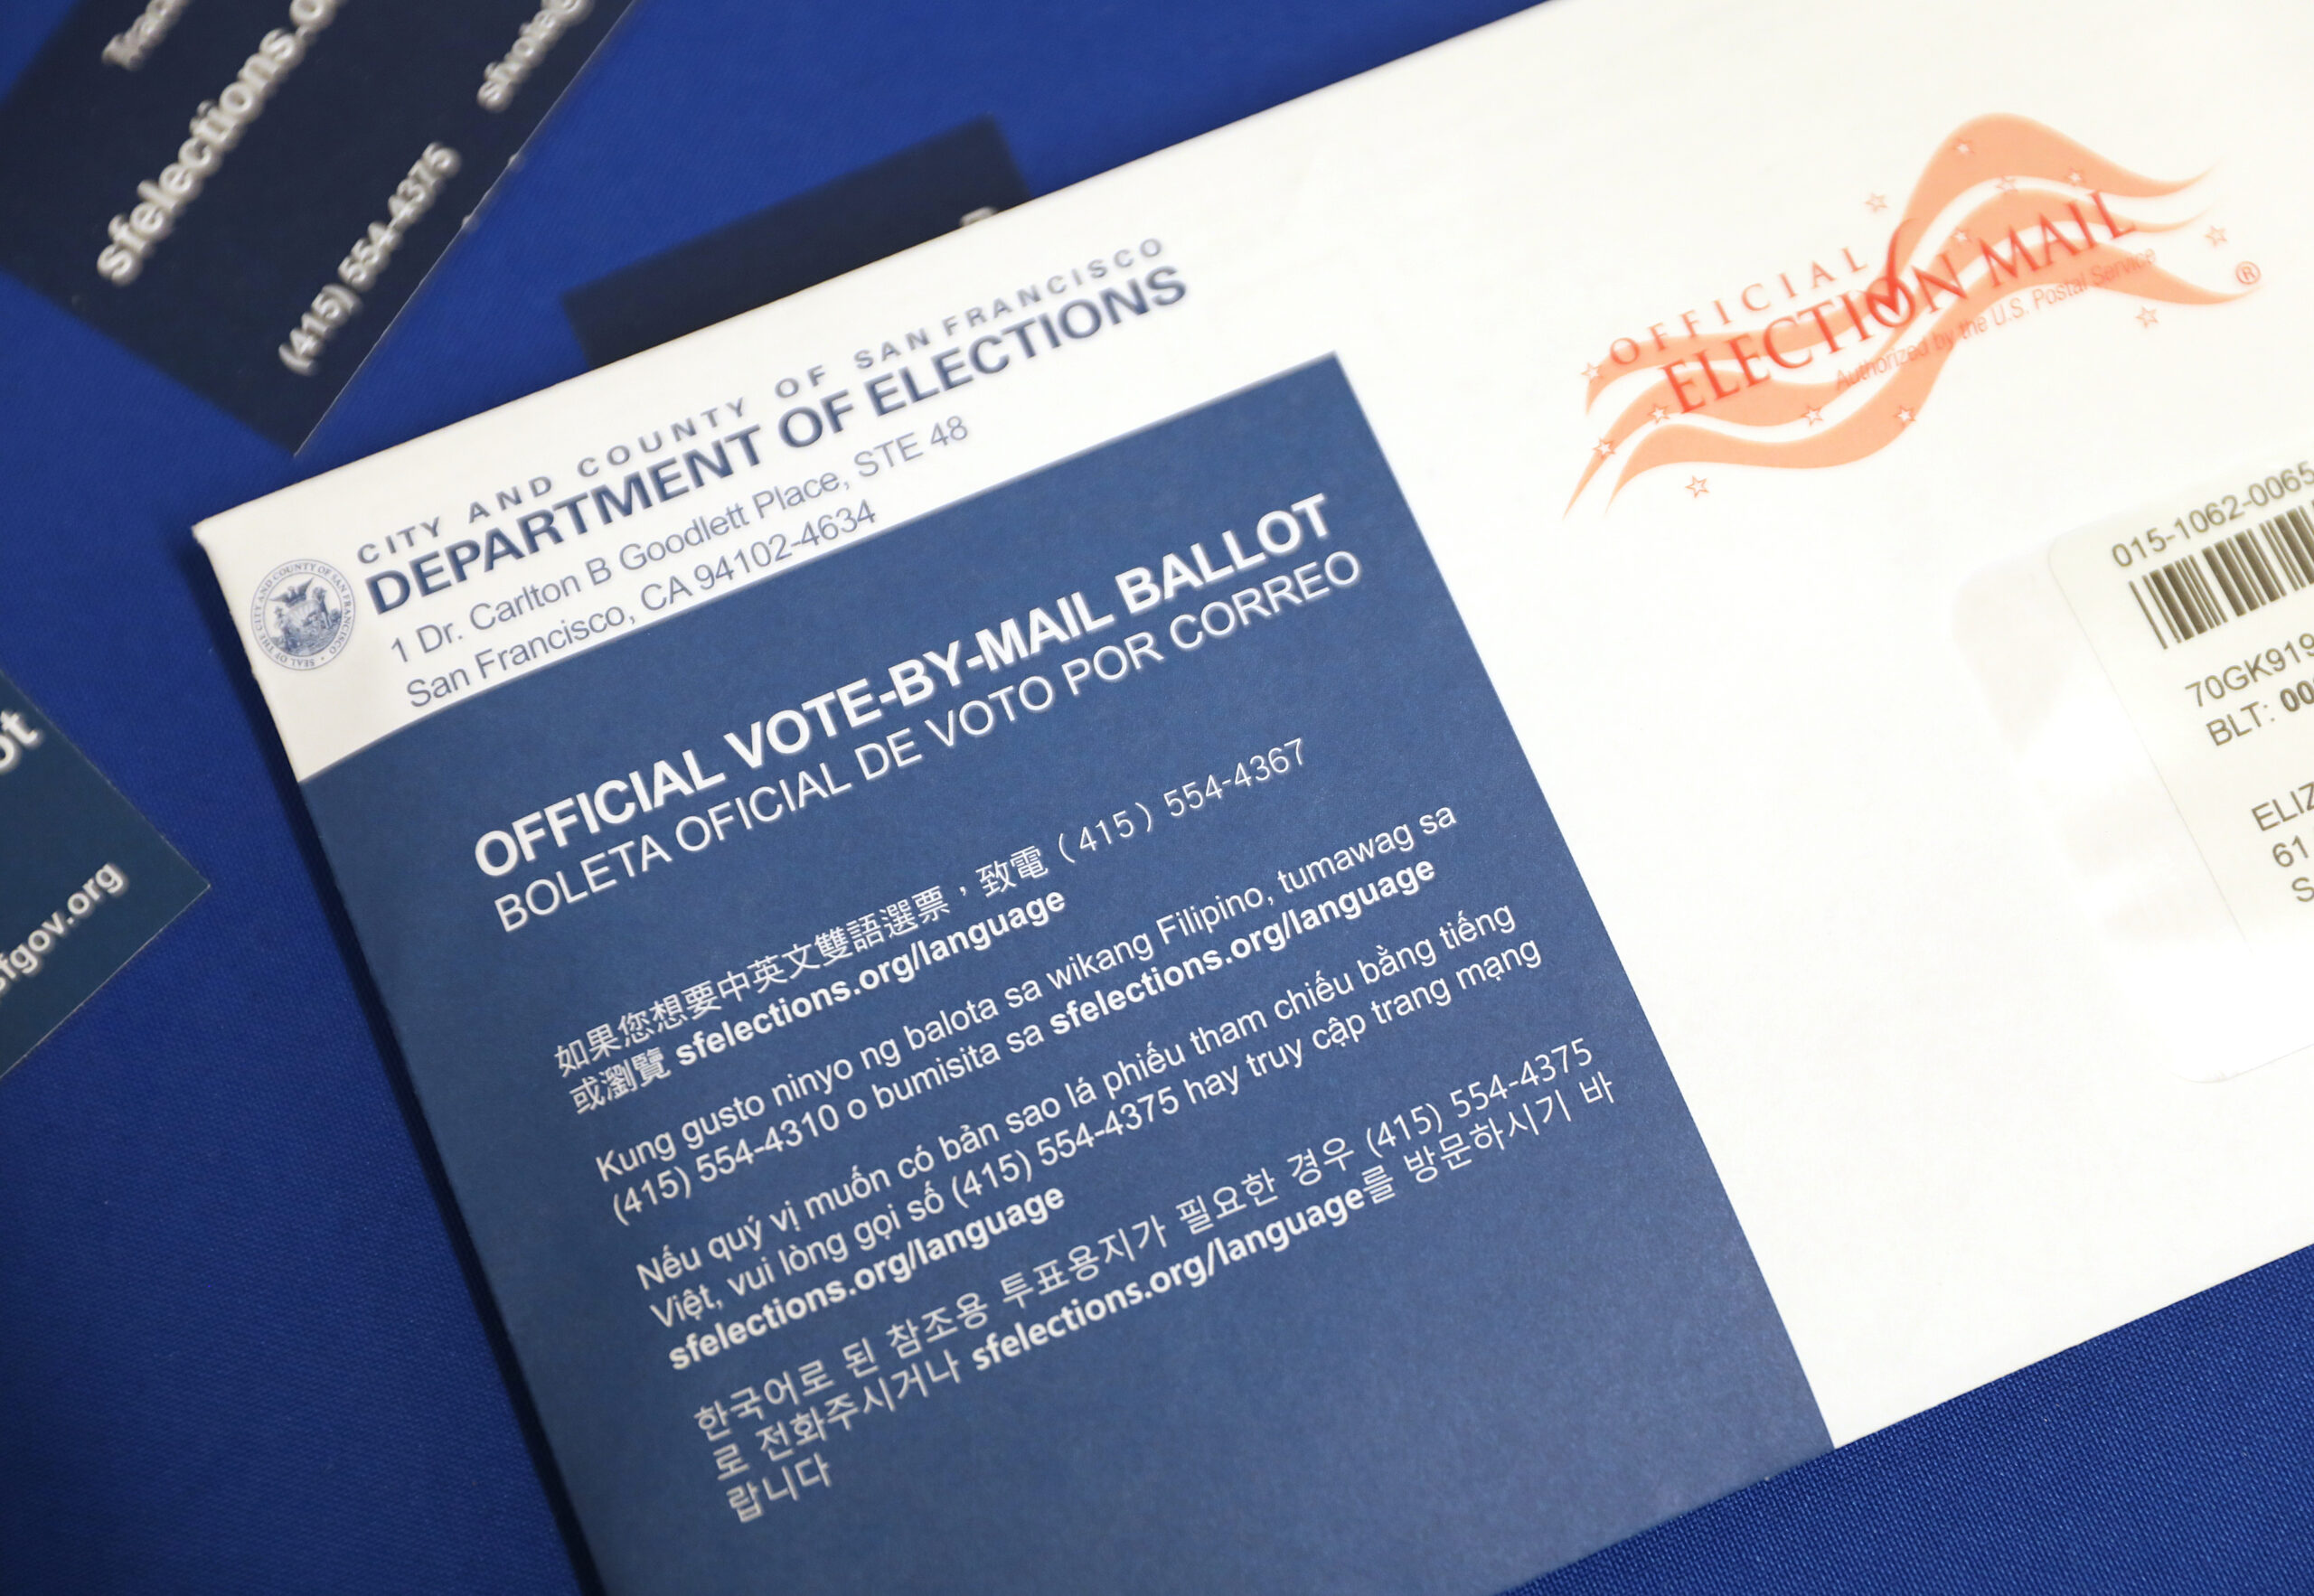 Vote-by-mail ballot seen at SF City Hall on Tuesday, Oct. 30, 2018, in San Francisco, Calif. | Liz Hafalia/SF Chronicle via Getty Images)